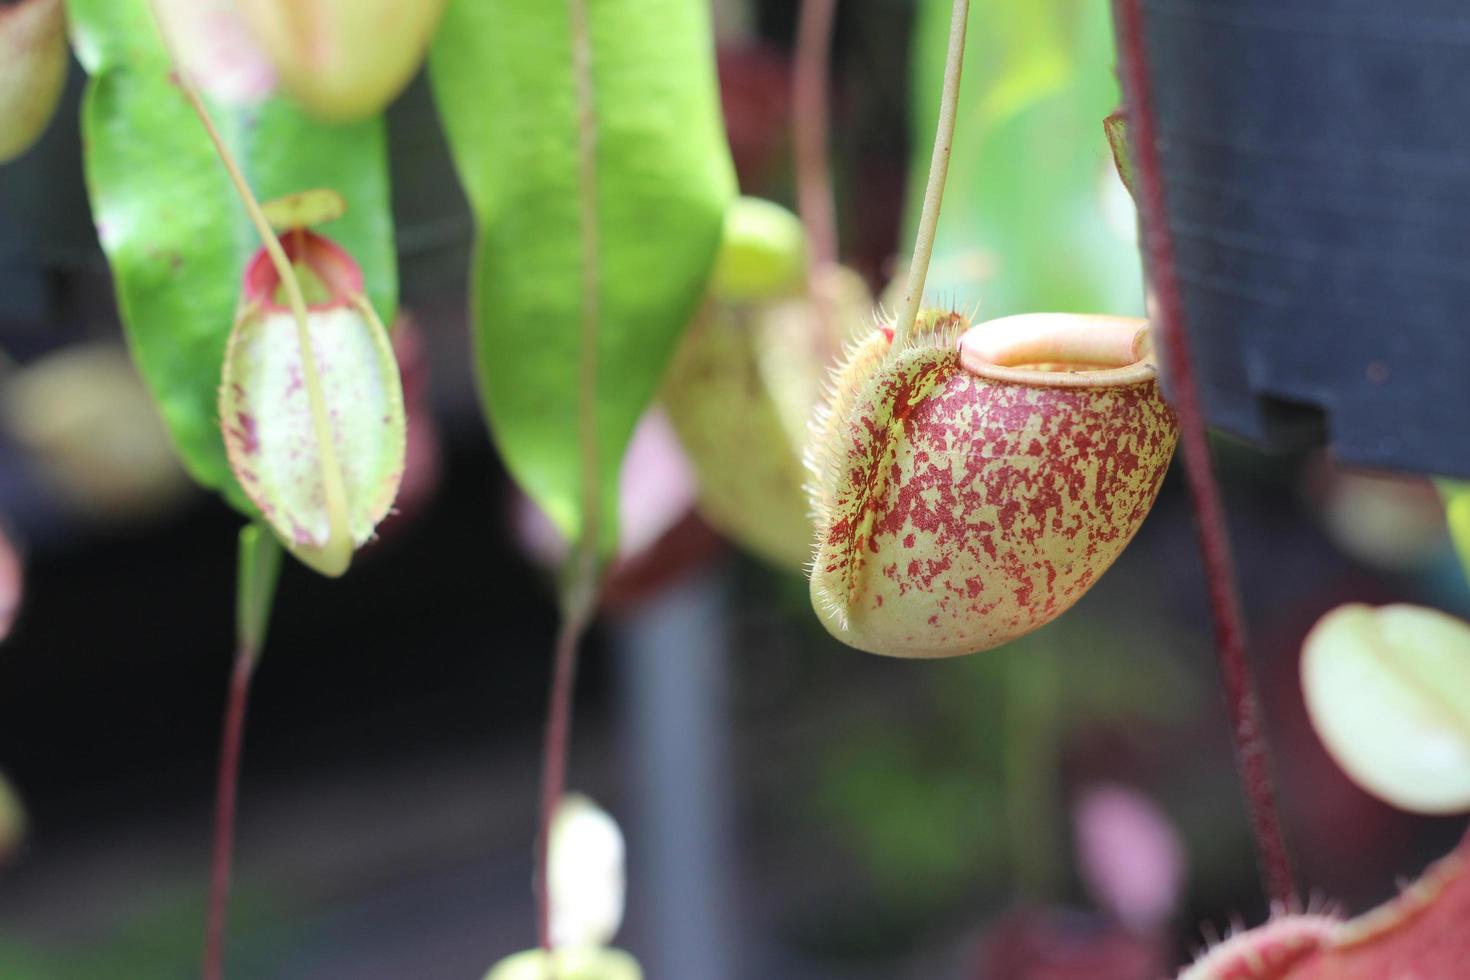 nepenthes boomkruiken close-up foto